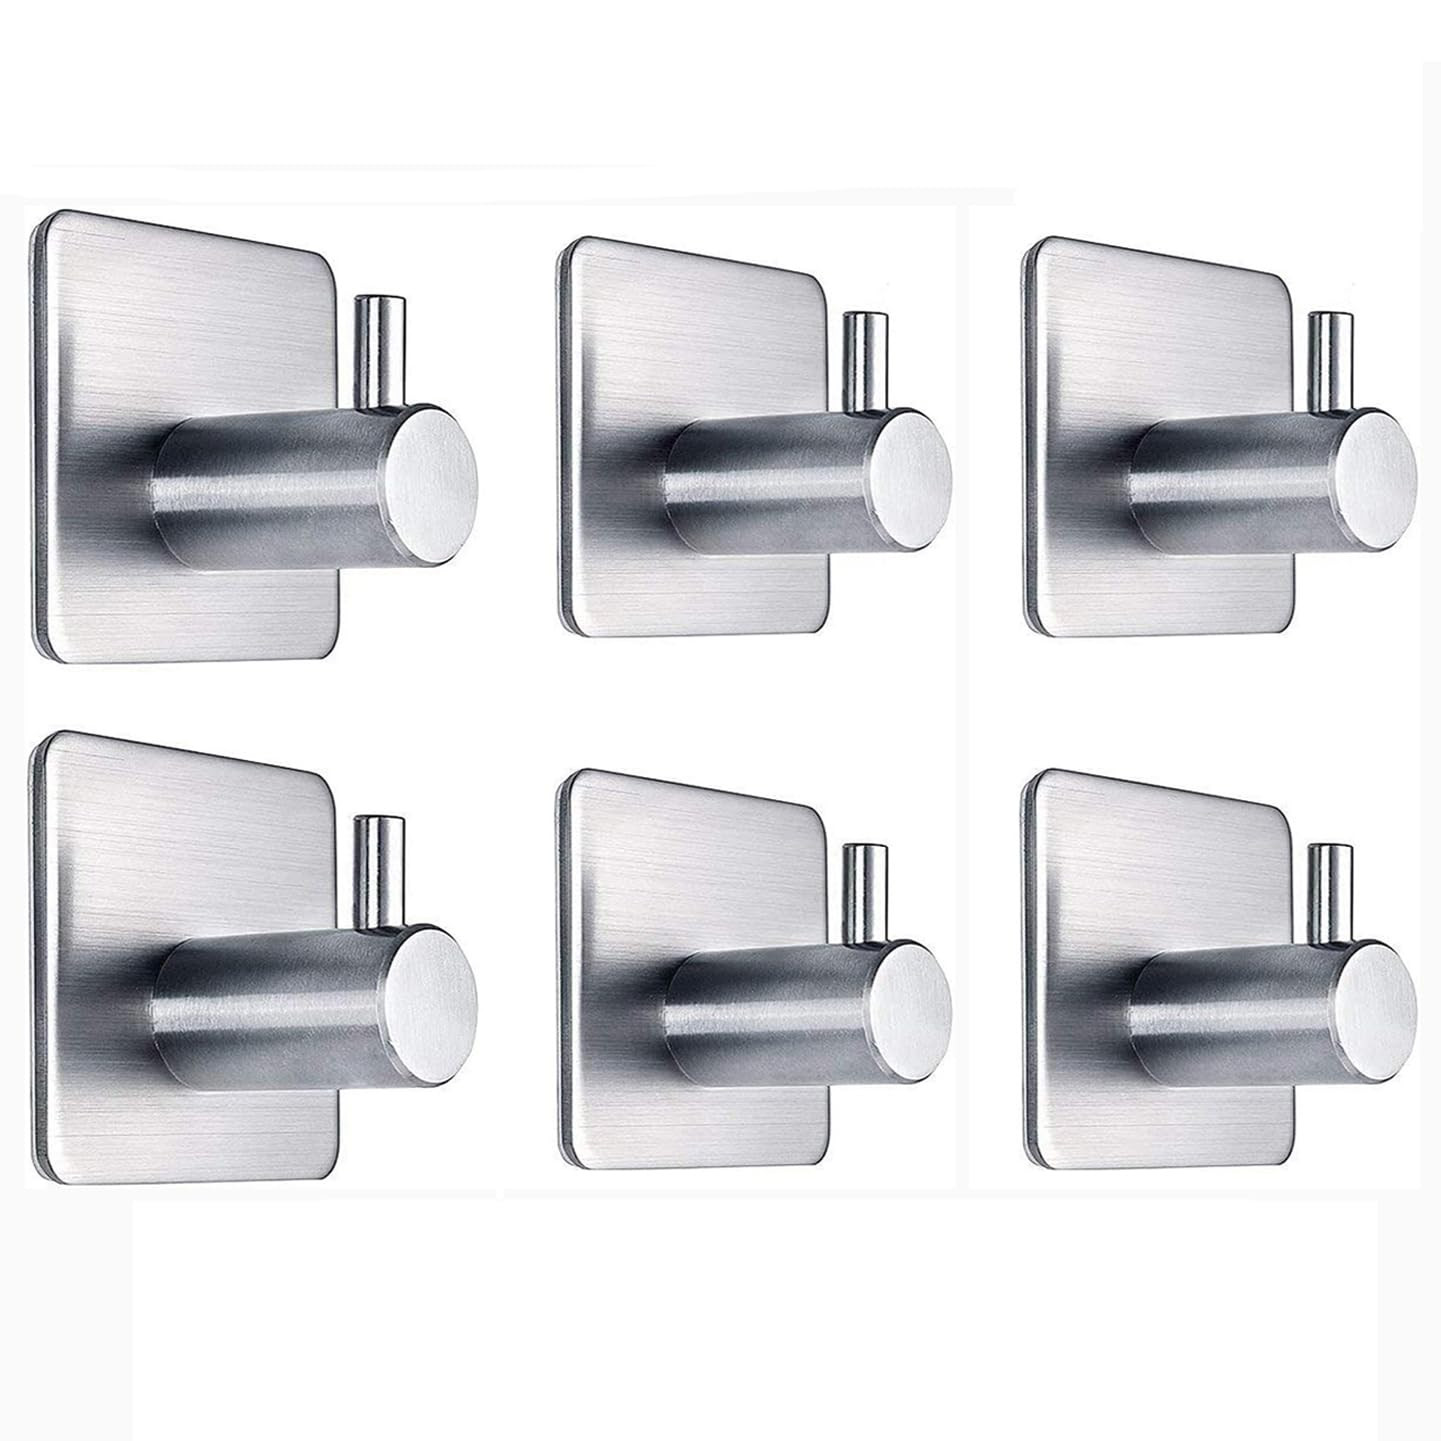 12pcs Suction Cup Hooks stainless steel wall hook outdoor Adhesive